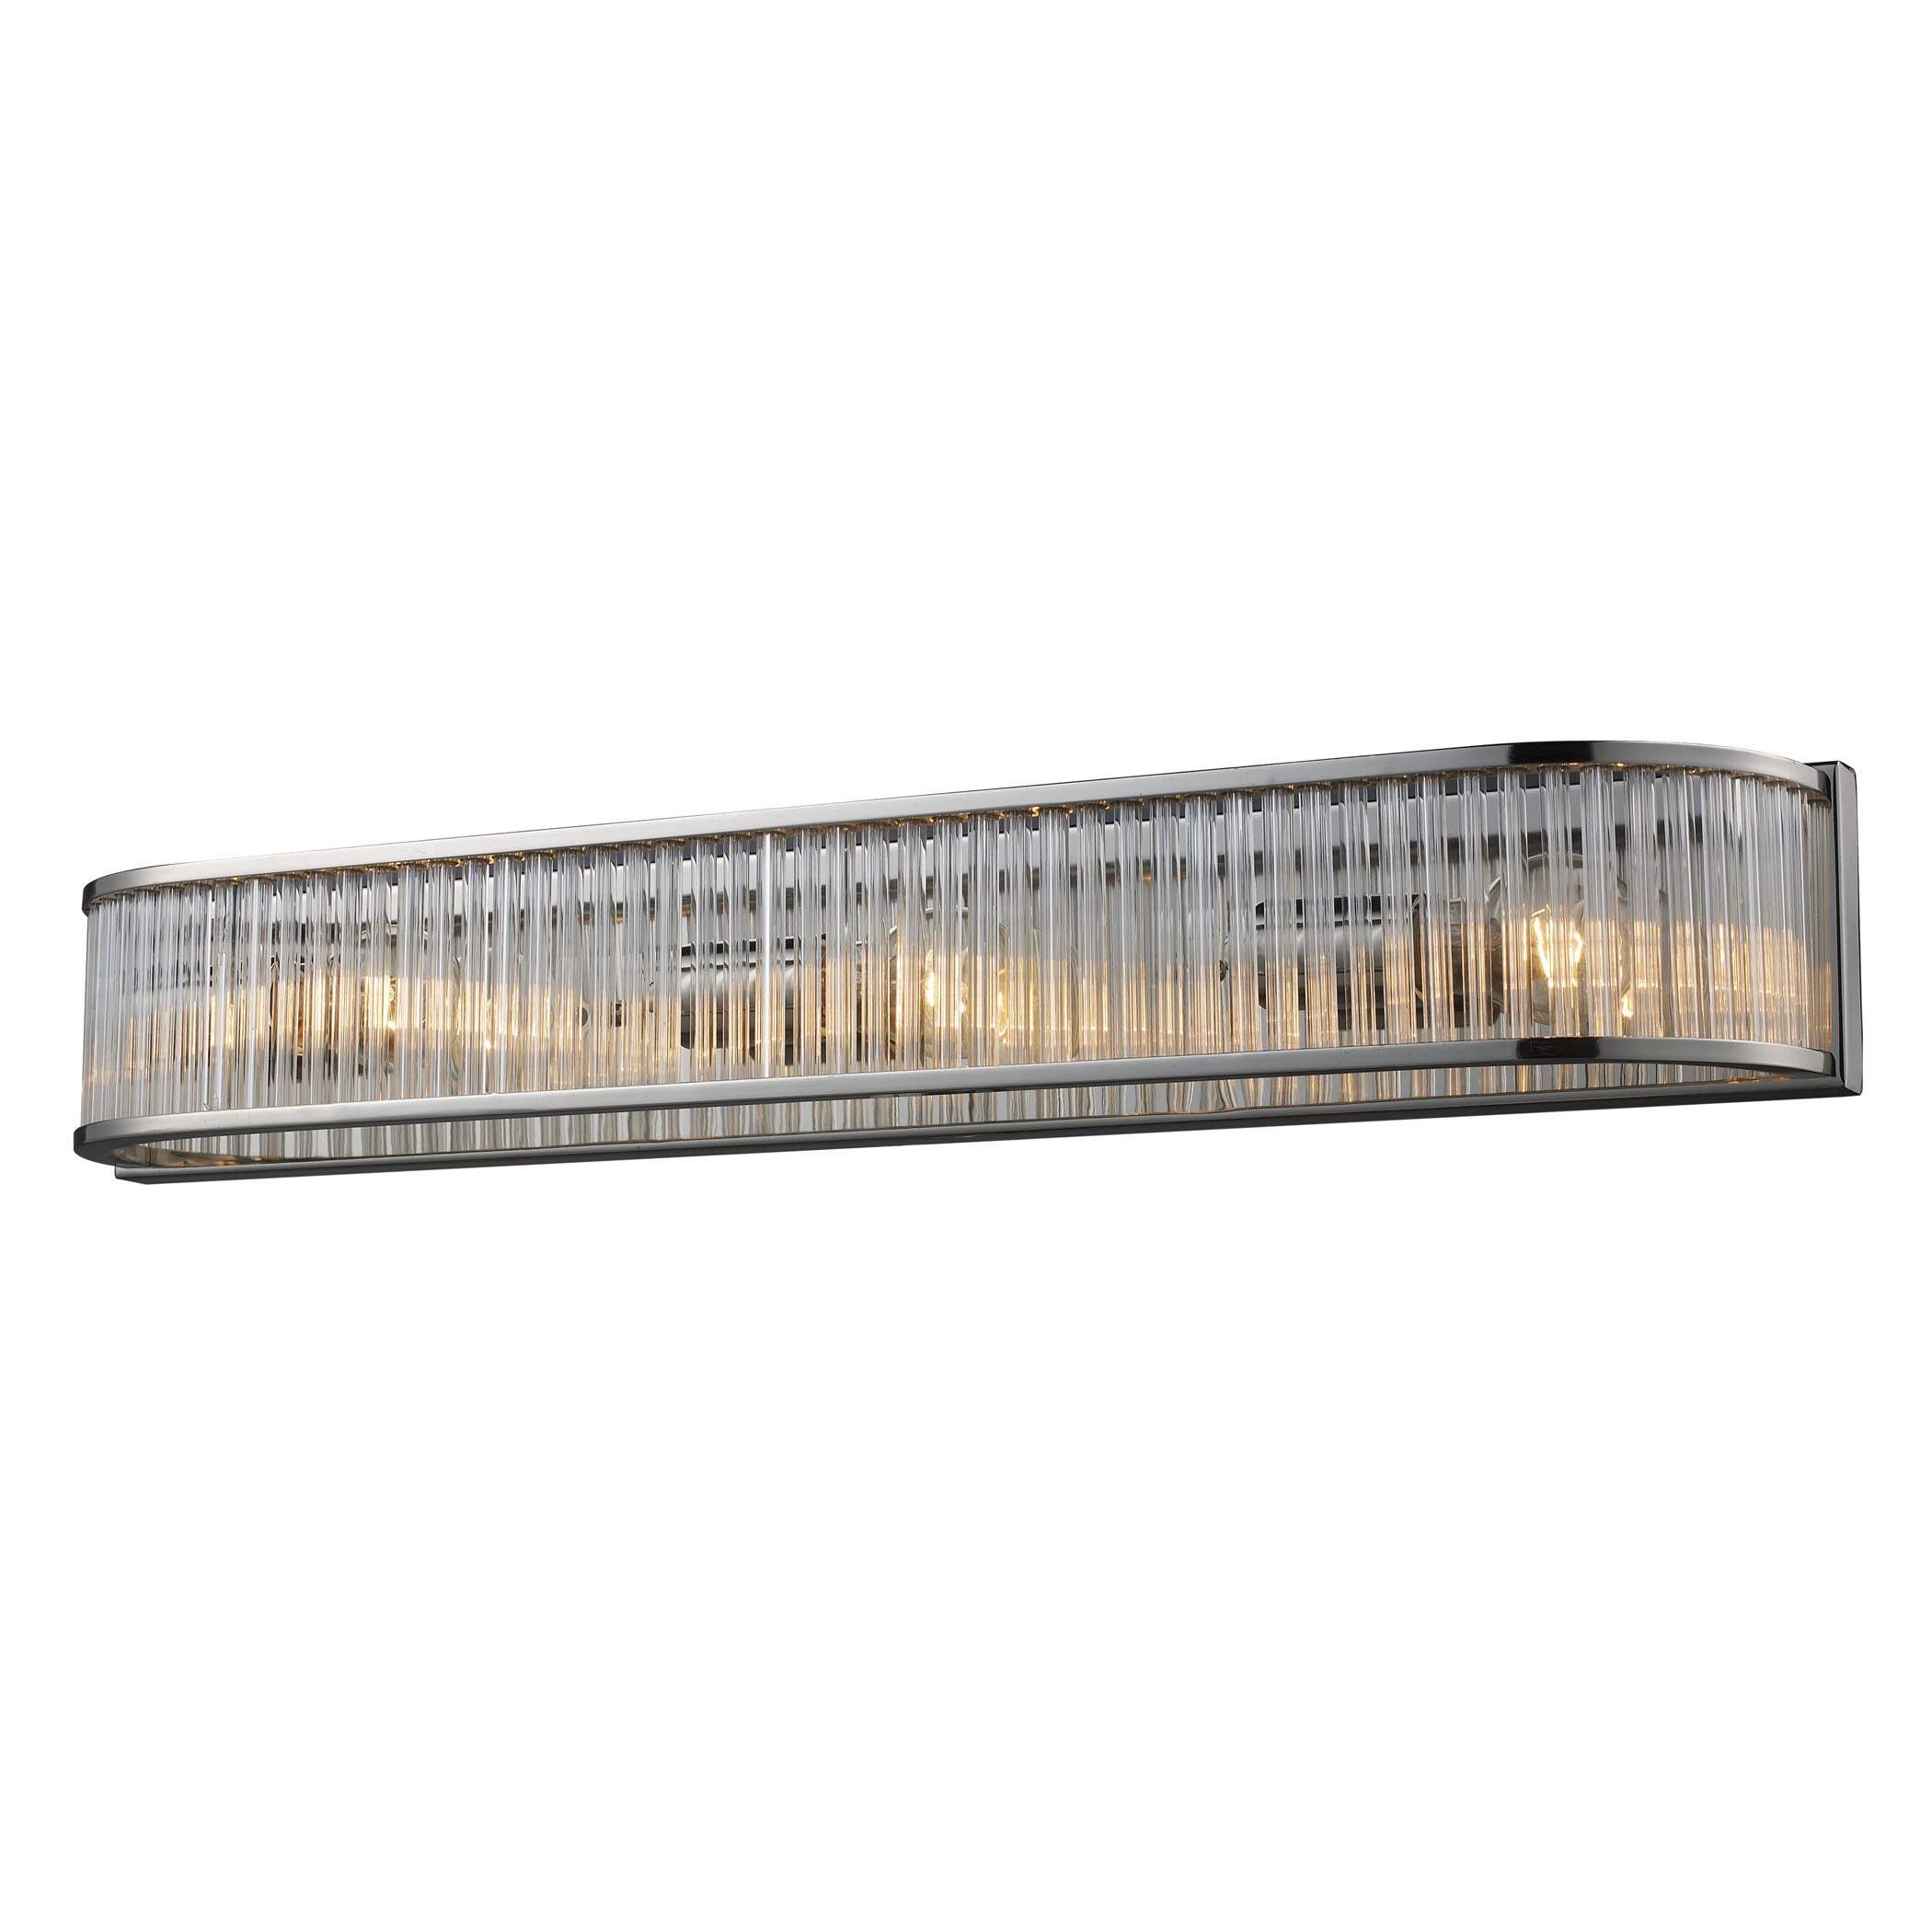 ELK Lighting 10127/3 Braxton 3-Light Vanity Sconce in Polished Nickel with Ribbed Glass